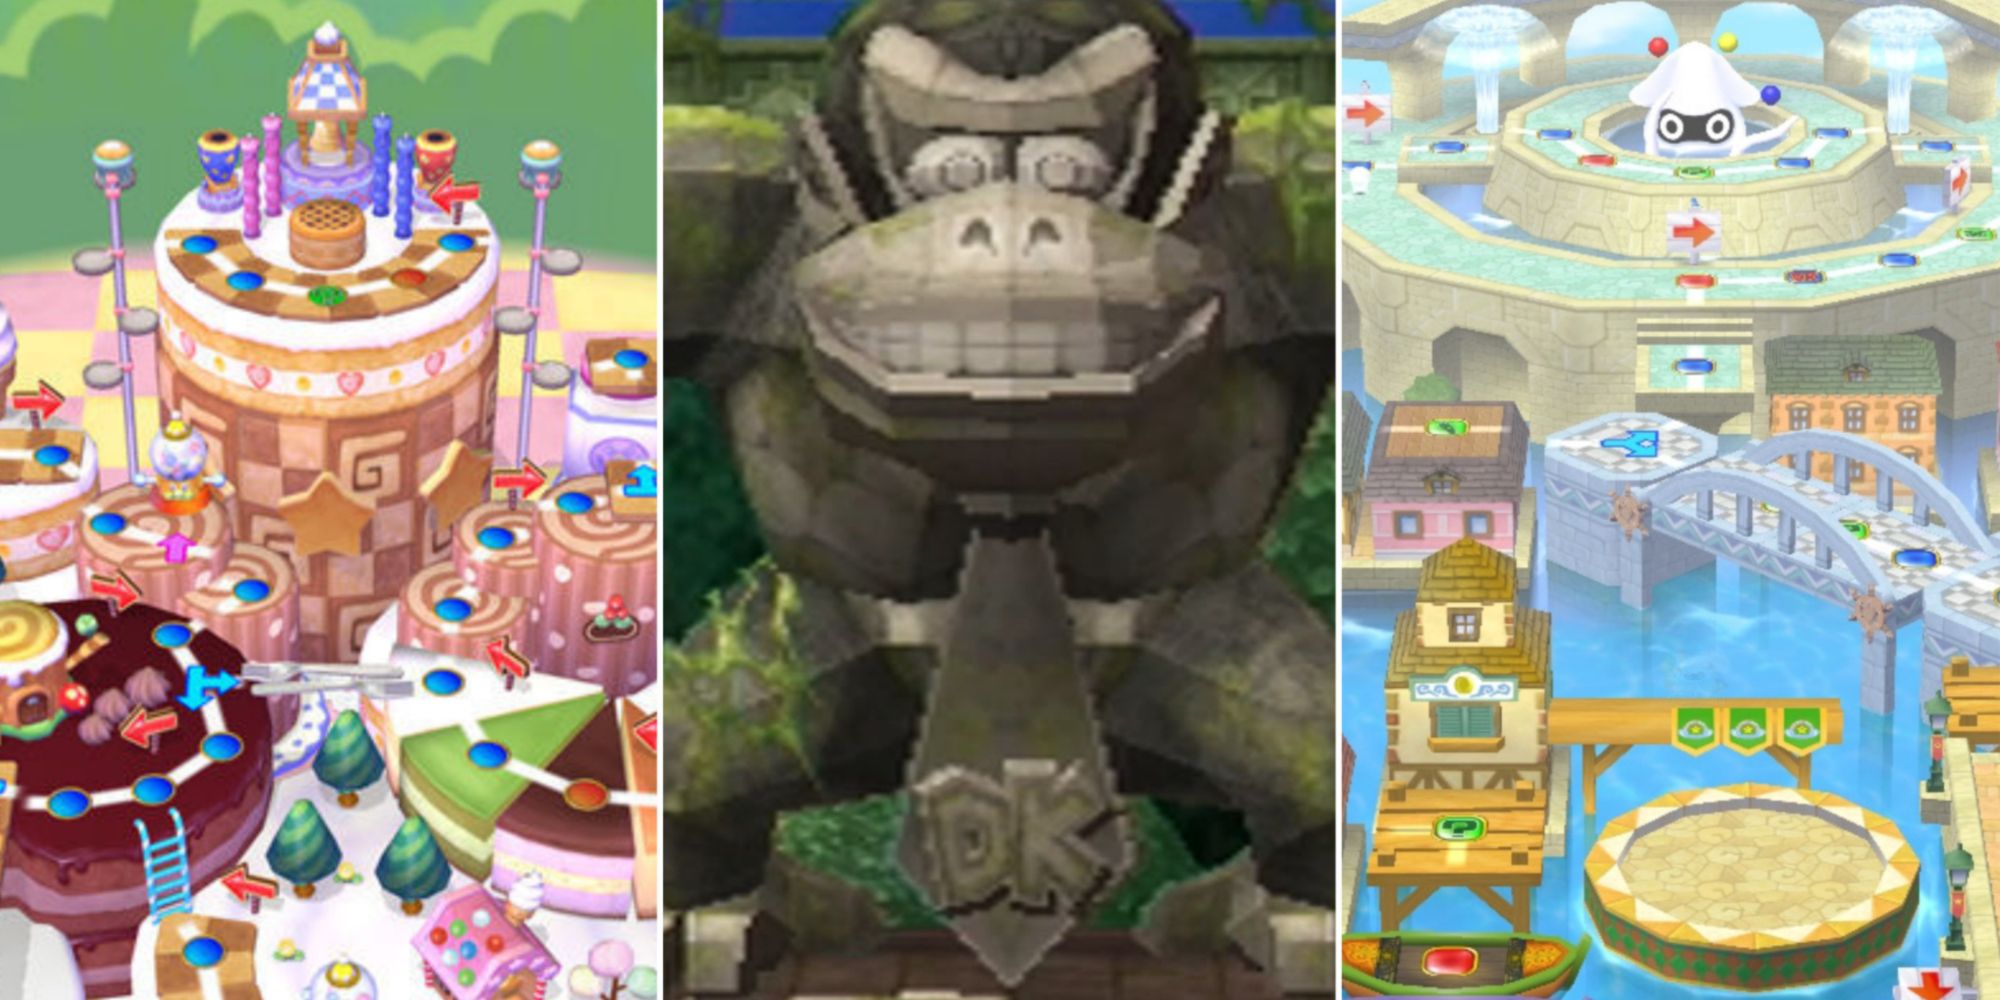 Mario Party Boards - Toy Dream and Grand Canal